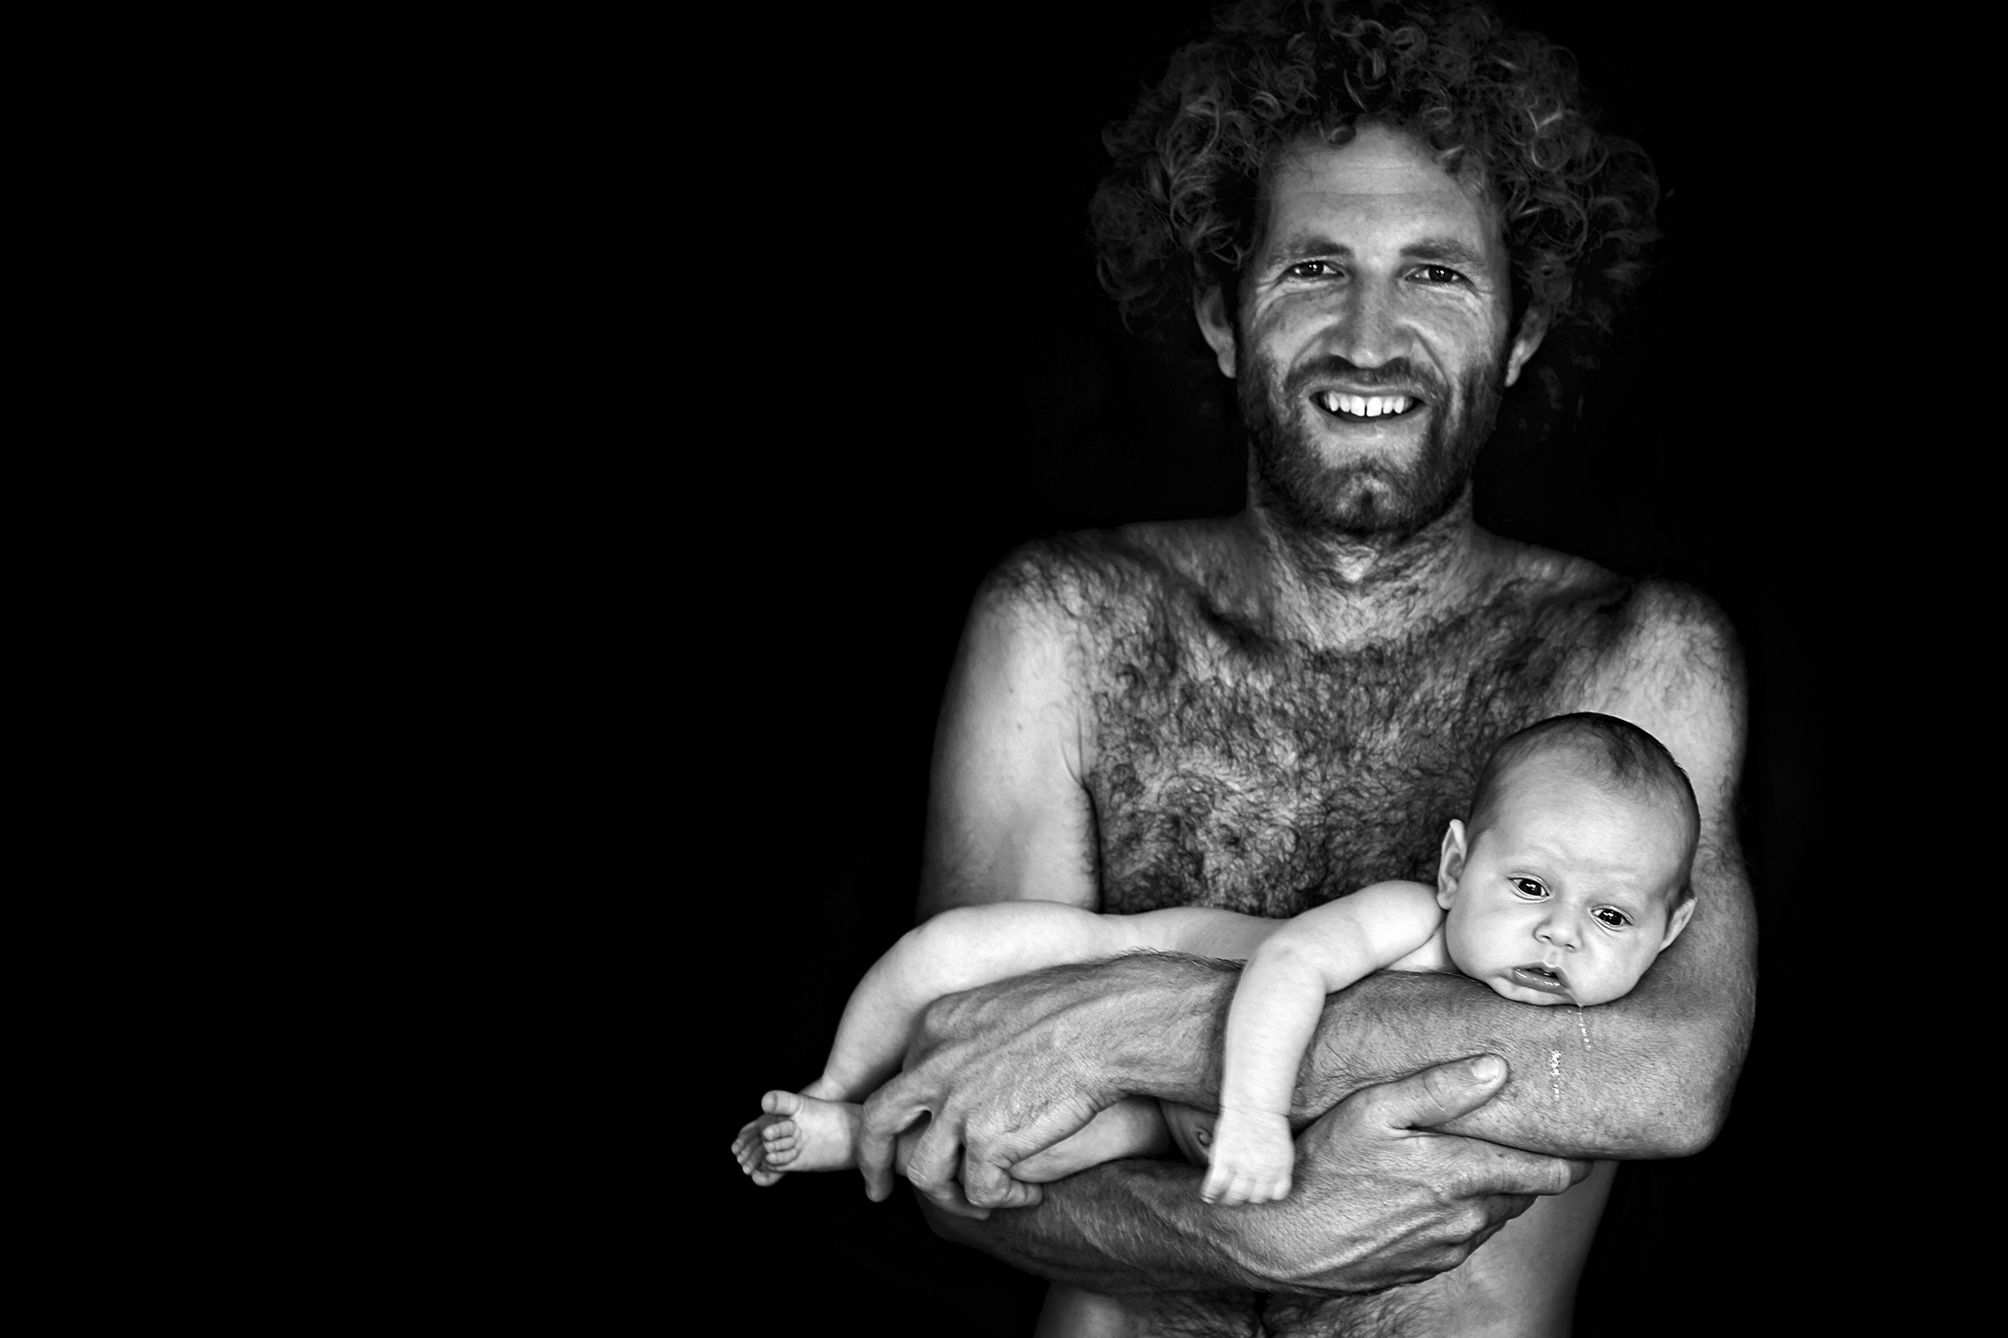 Black and white portrait of a naked man with his naked newborn